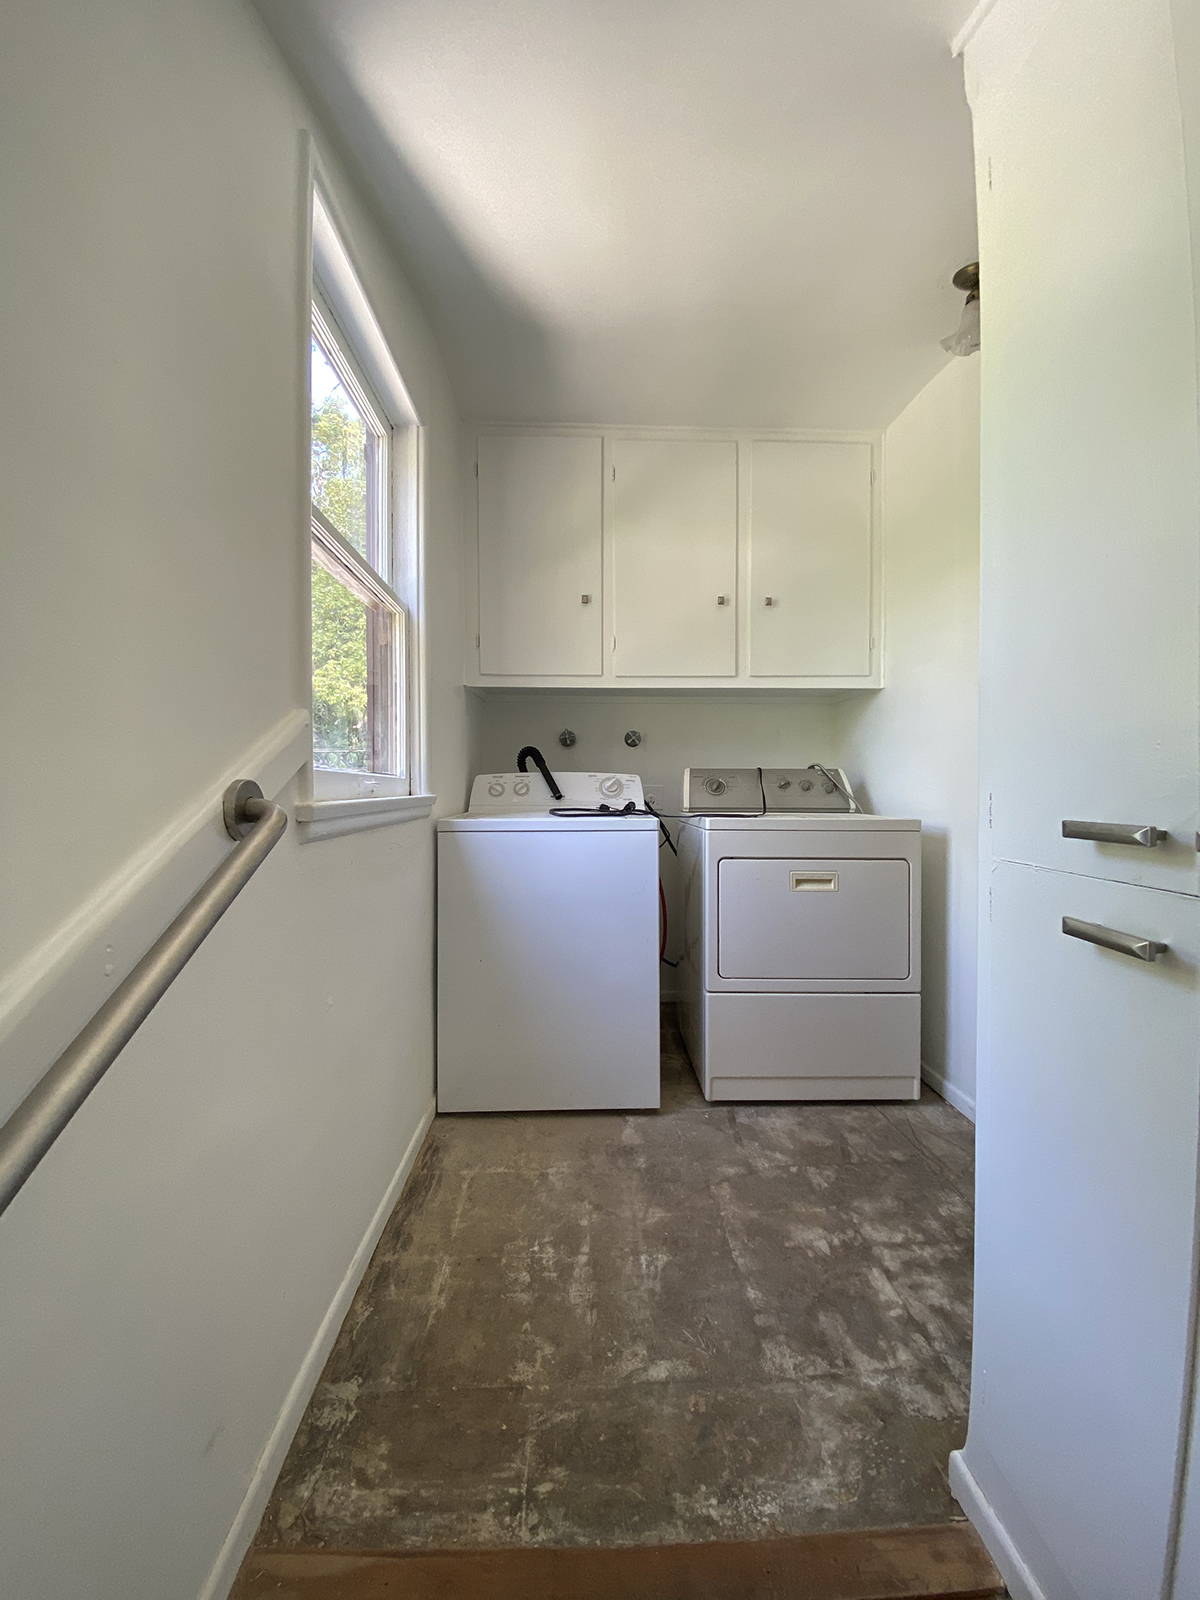  Before and After – Laundry Room Makeover